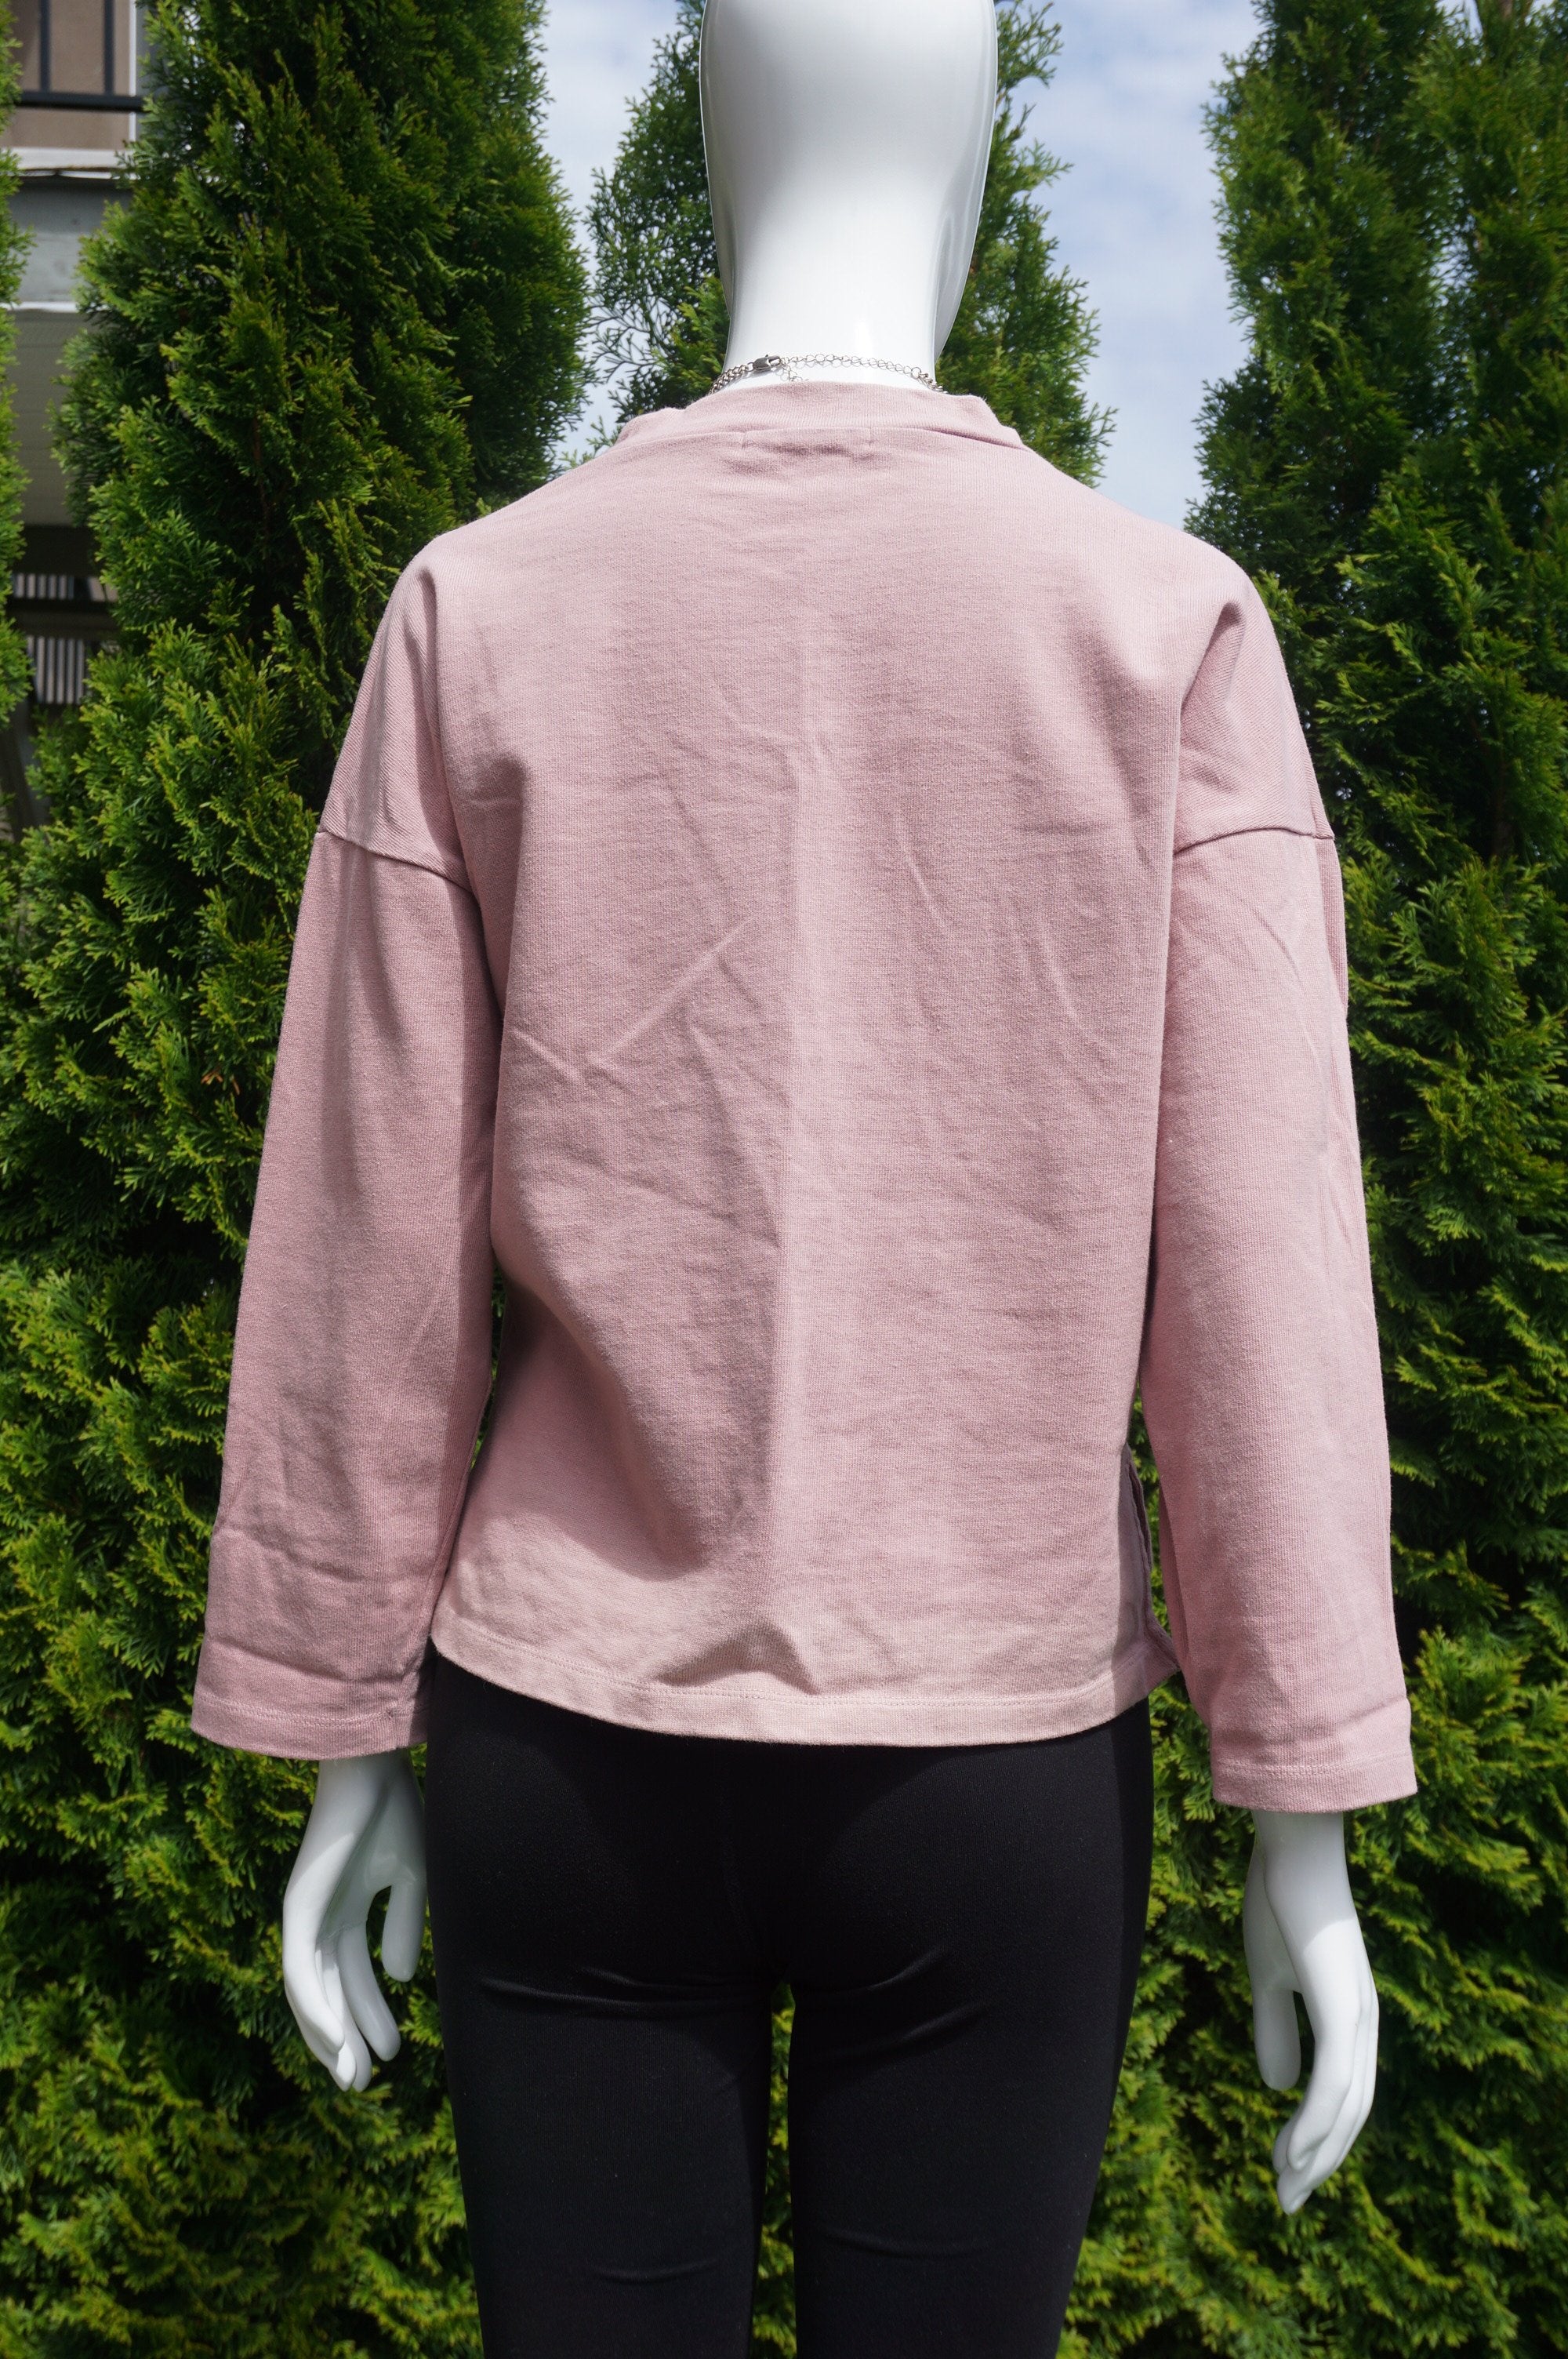 Moussy Comfy Wide Long Sleeve Pink Sweat Top, Comfortable one size top made from 100% cotton., Pink, 100% Cotton, women's Tops, women's Pink Tops, Moussy women's Tops, sweat top, pink long sleeve sweater, long sleeve sweat top, casual top, comfy top